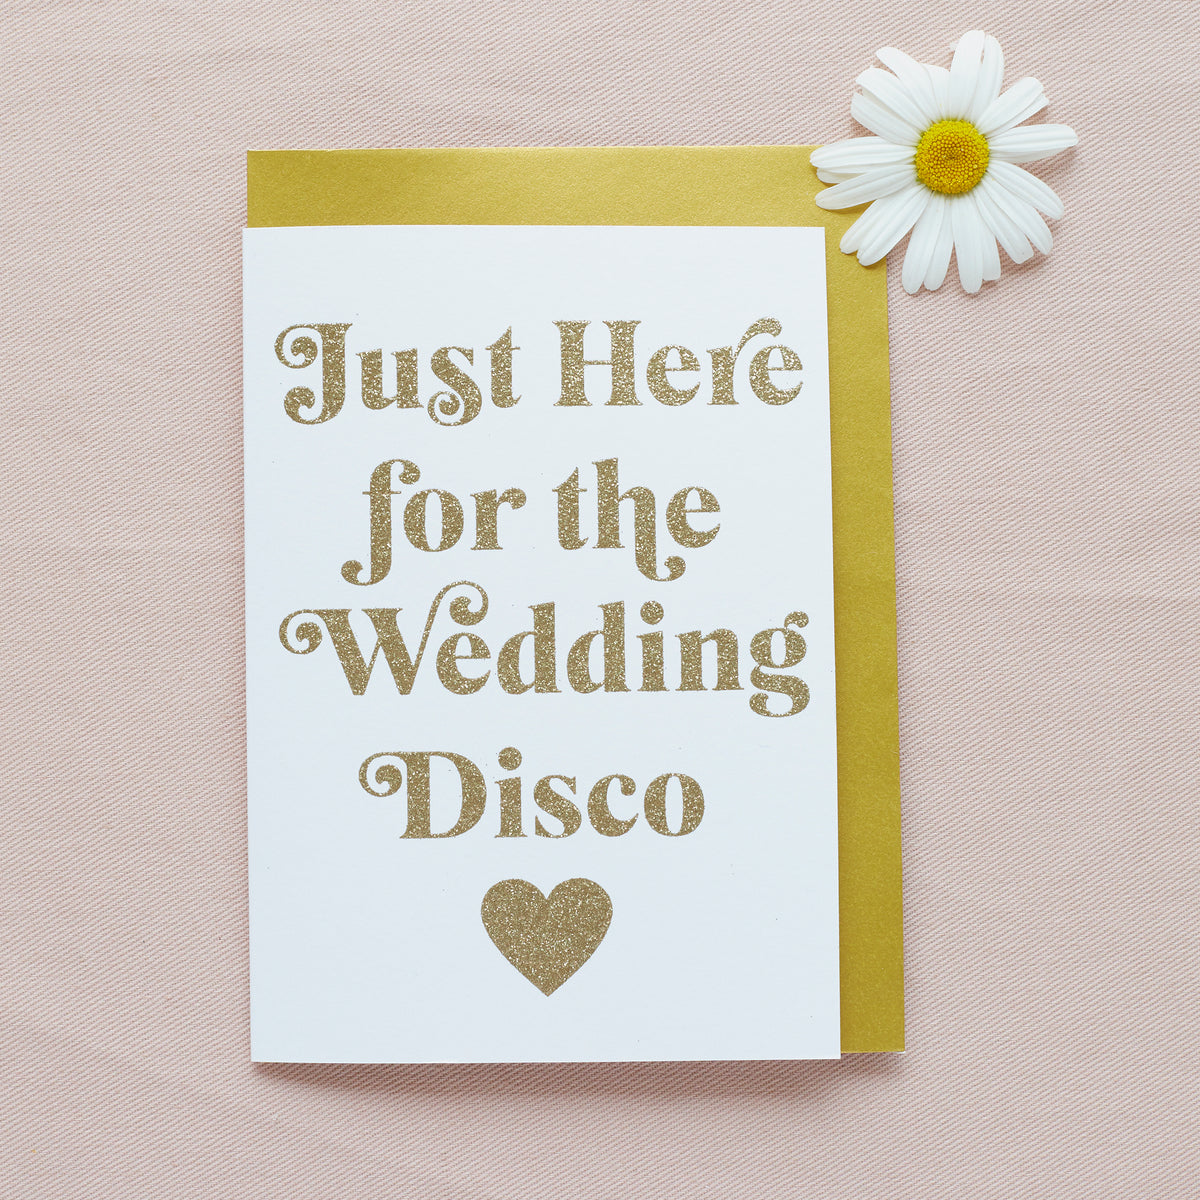 'Just Here For the Wedding Disco' White + Gold Greetings Card - Biodegradable Glitter